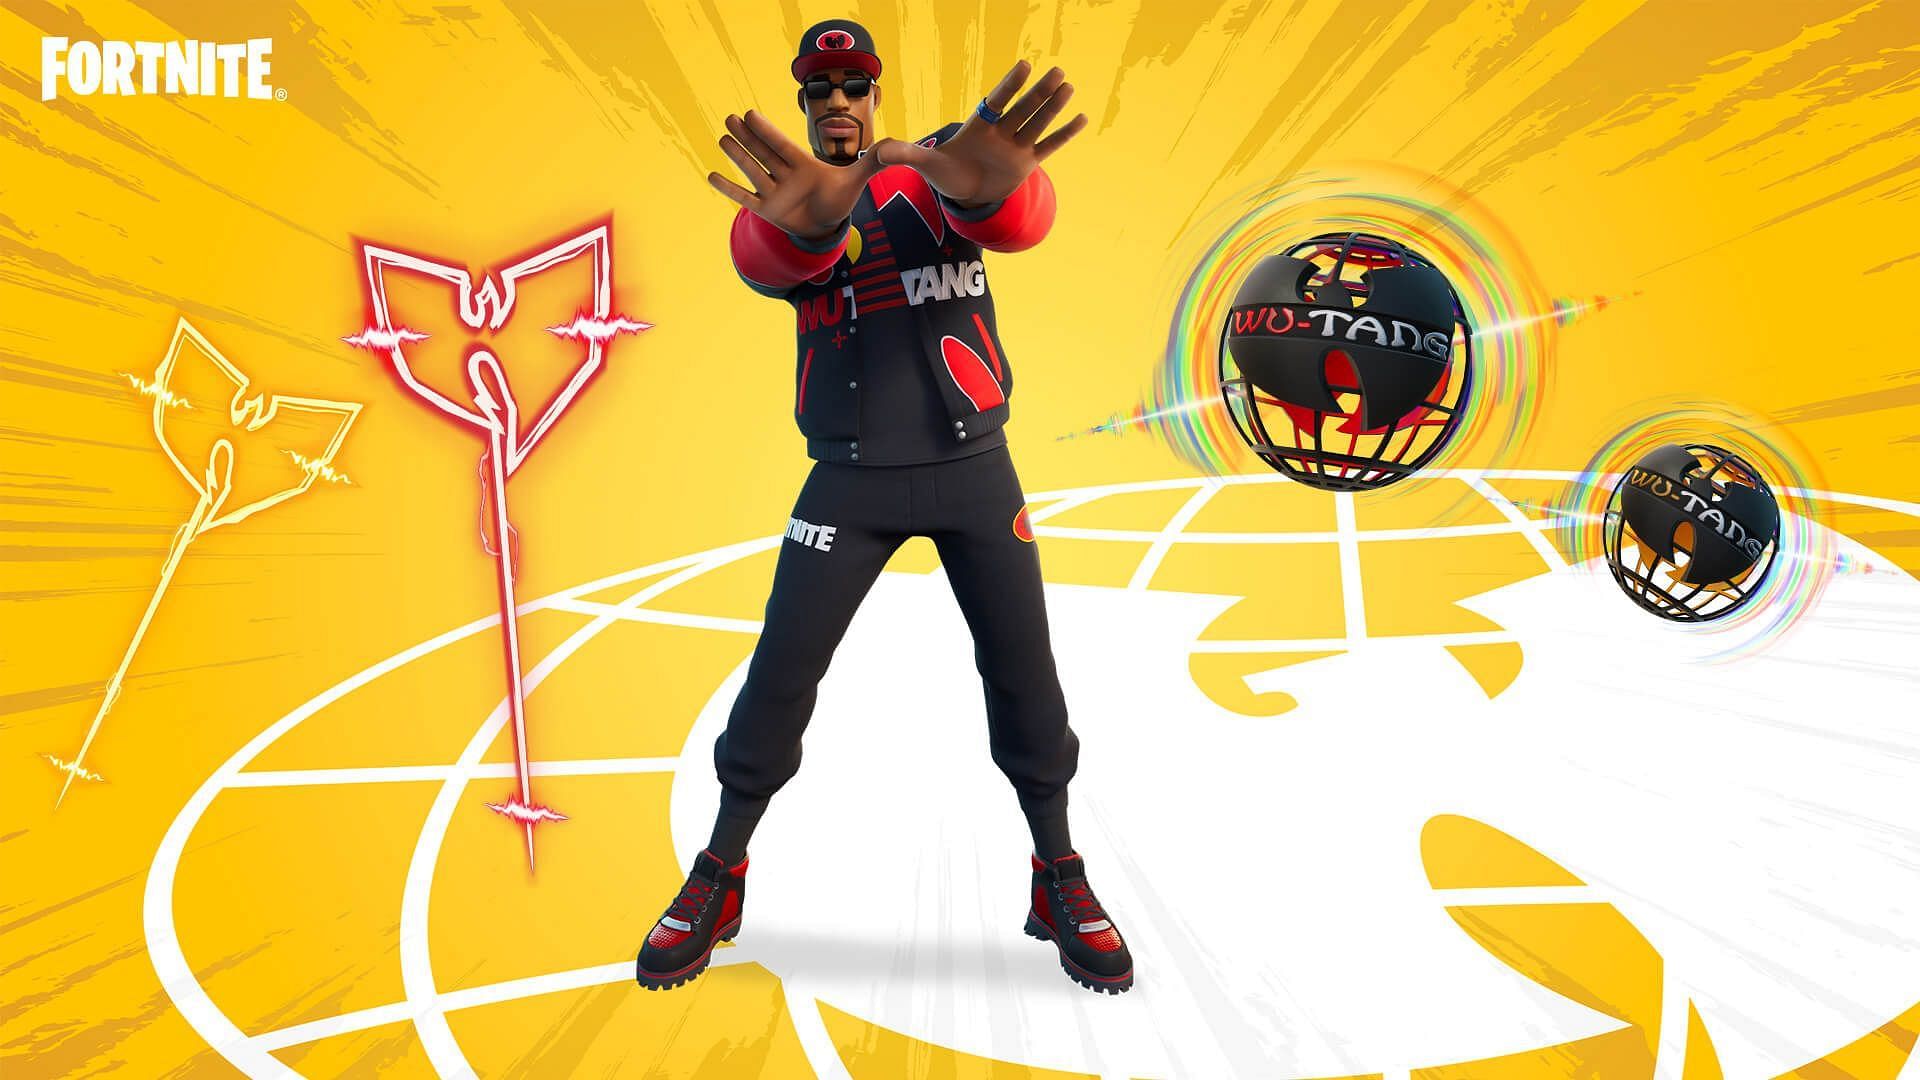 Throwback BG Outfit from the Wu-Tang collab (Image via Epic Games)